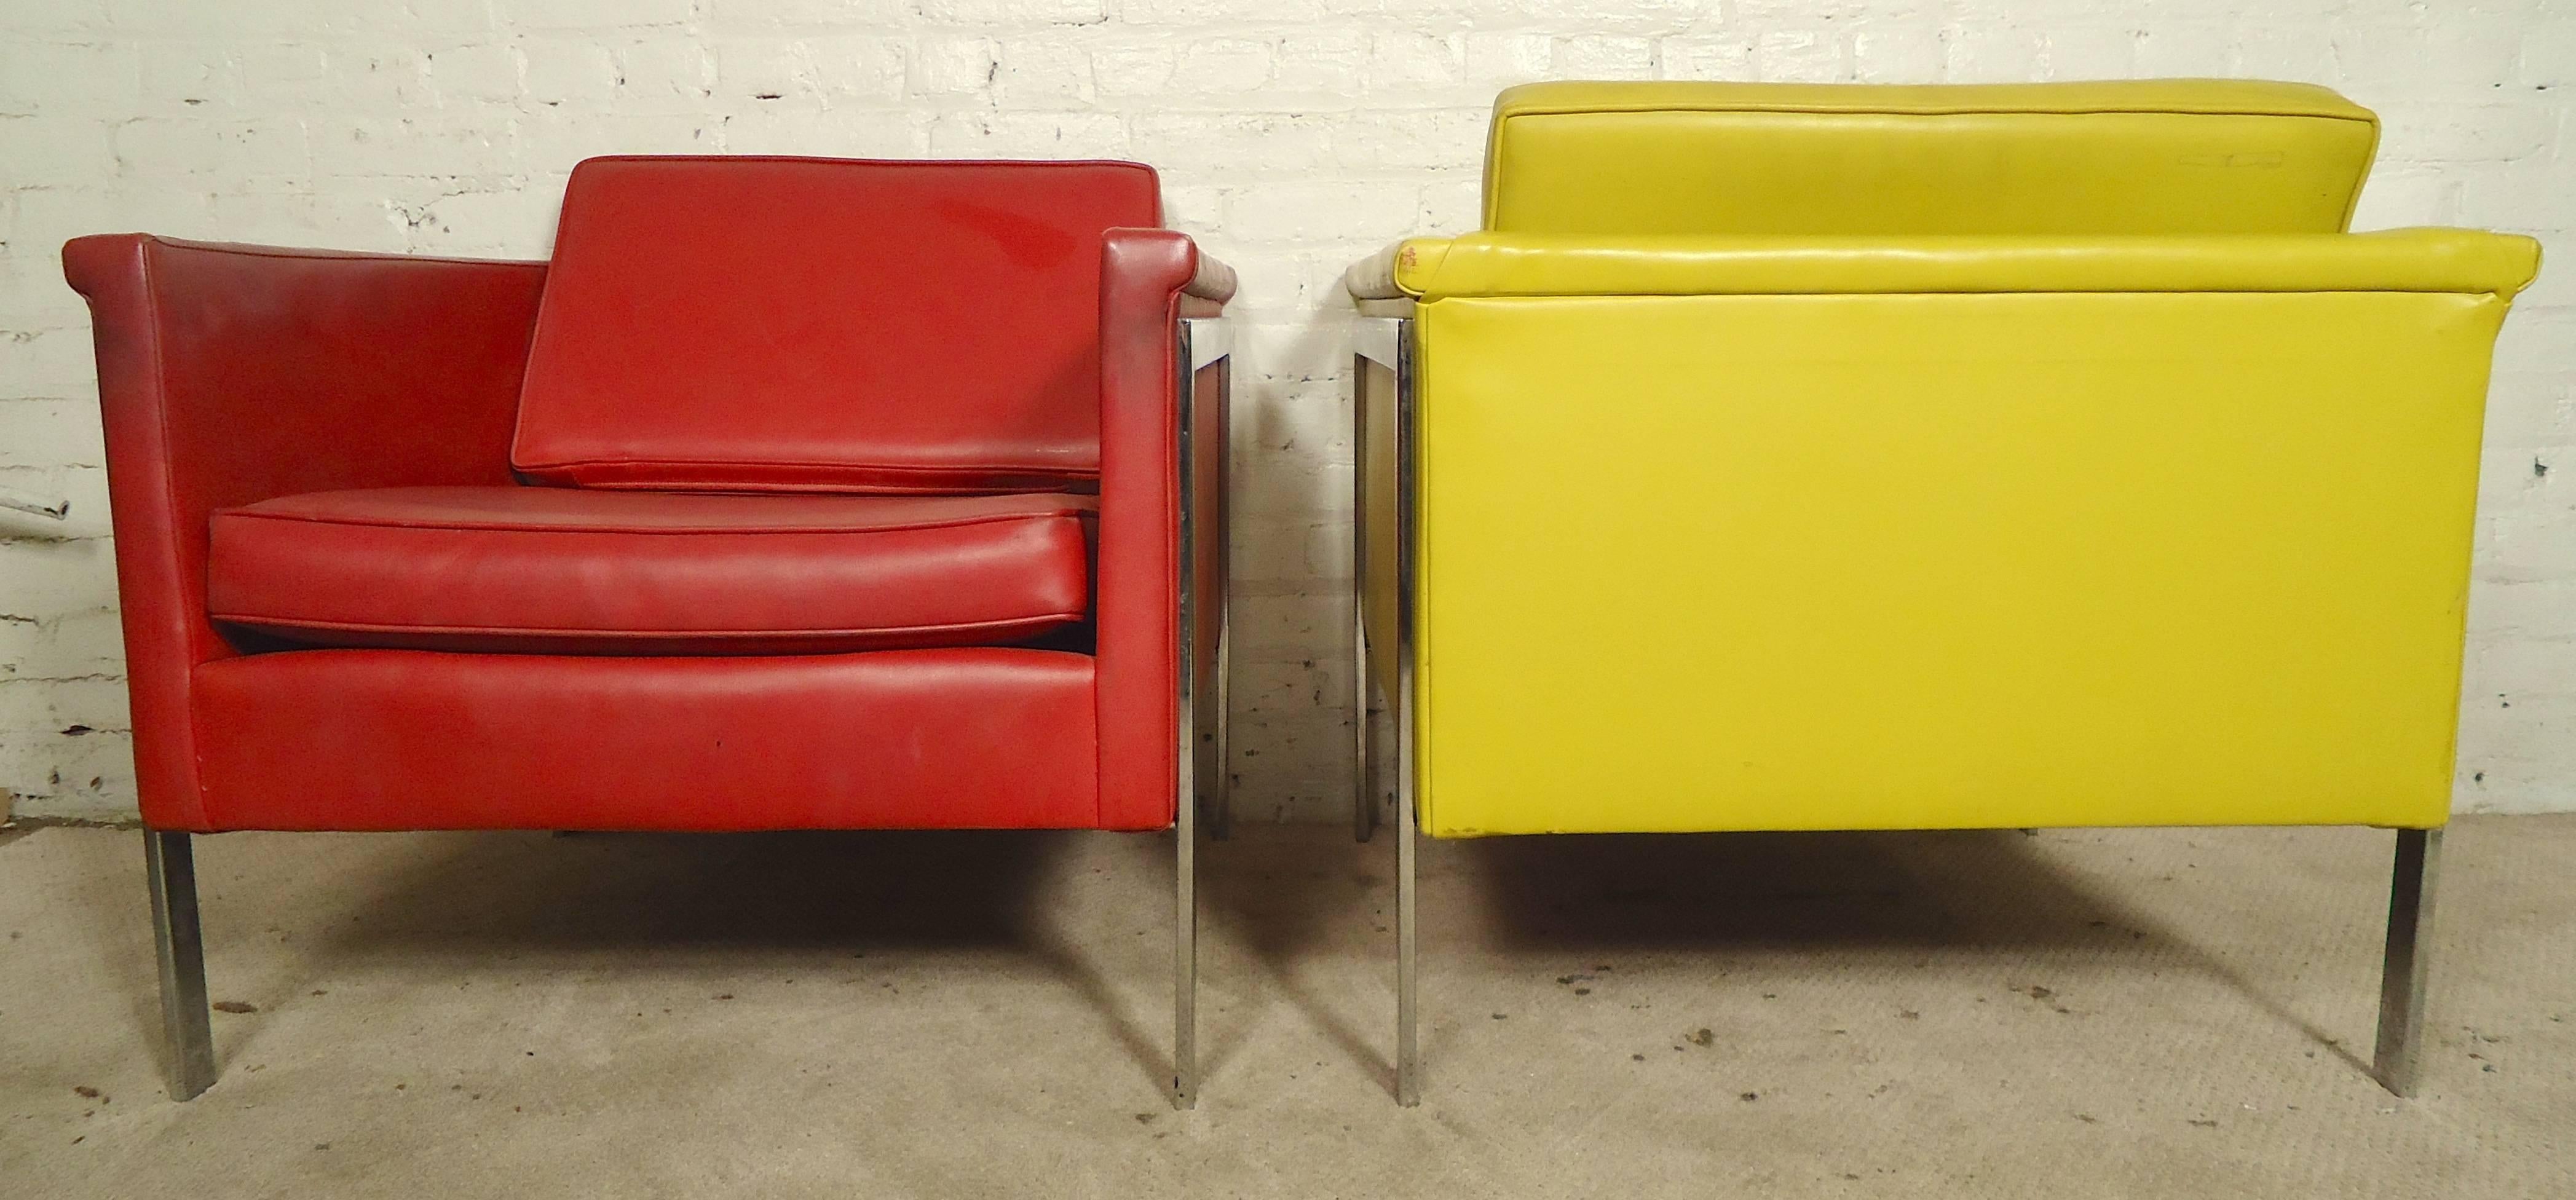 Striking pair of Mid-Century Modern lounge chairs with thick chrome legs that run across the side and back down, giving a nice modern profile. Colorful red and yellow vinyl upholstery make an impressive statement in home or business seating